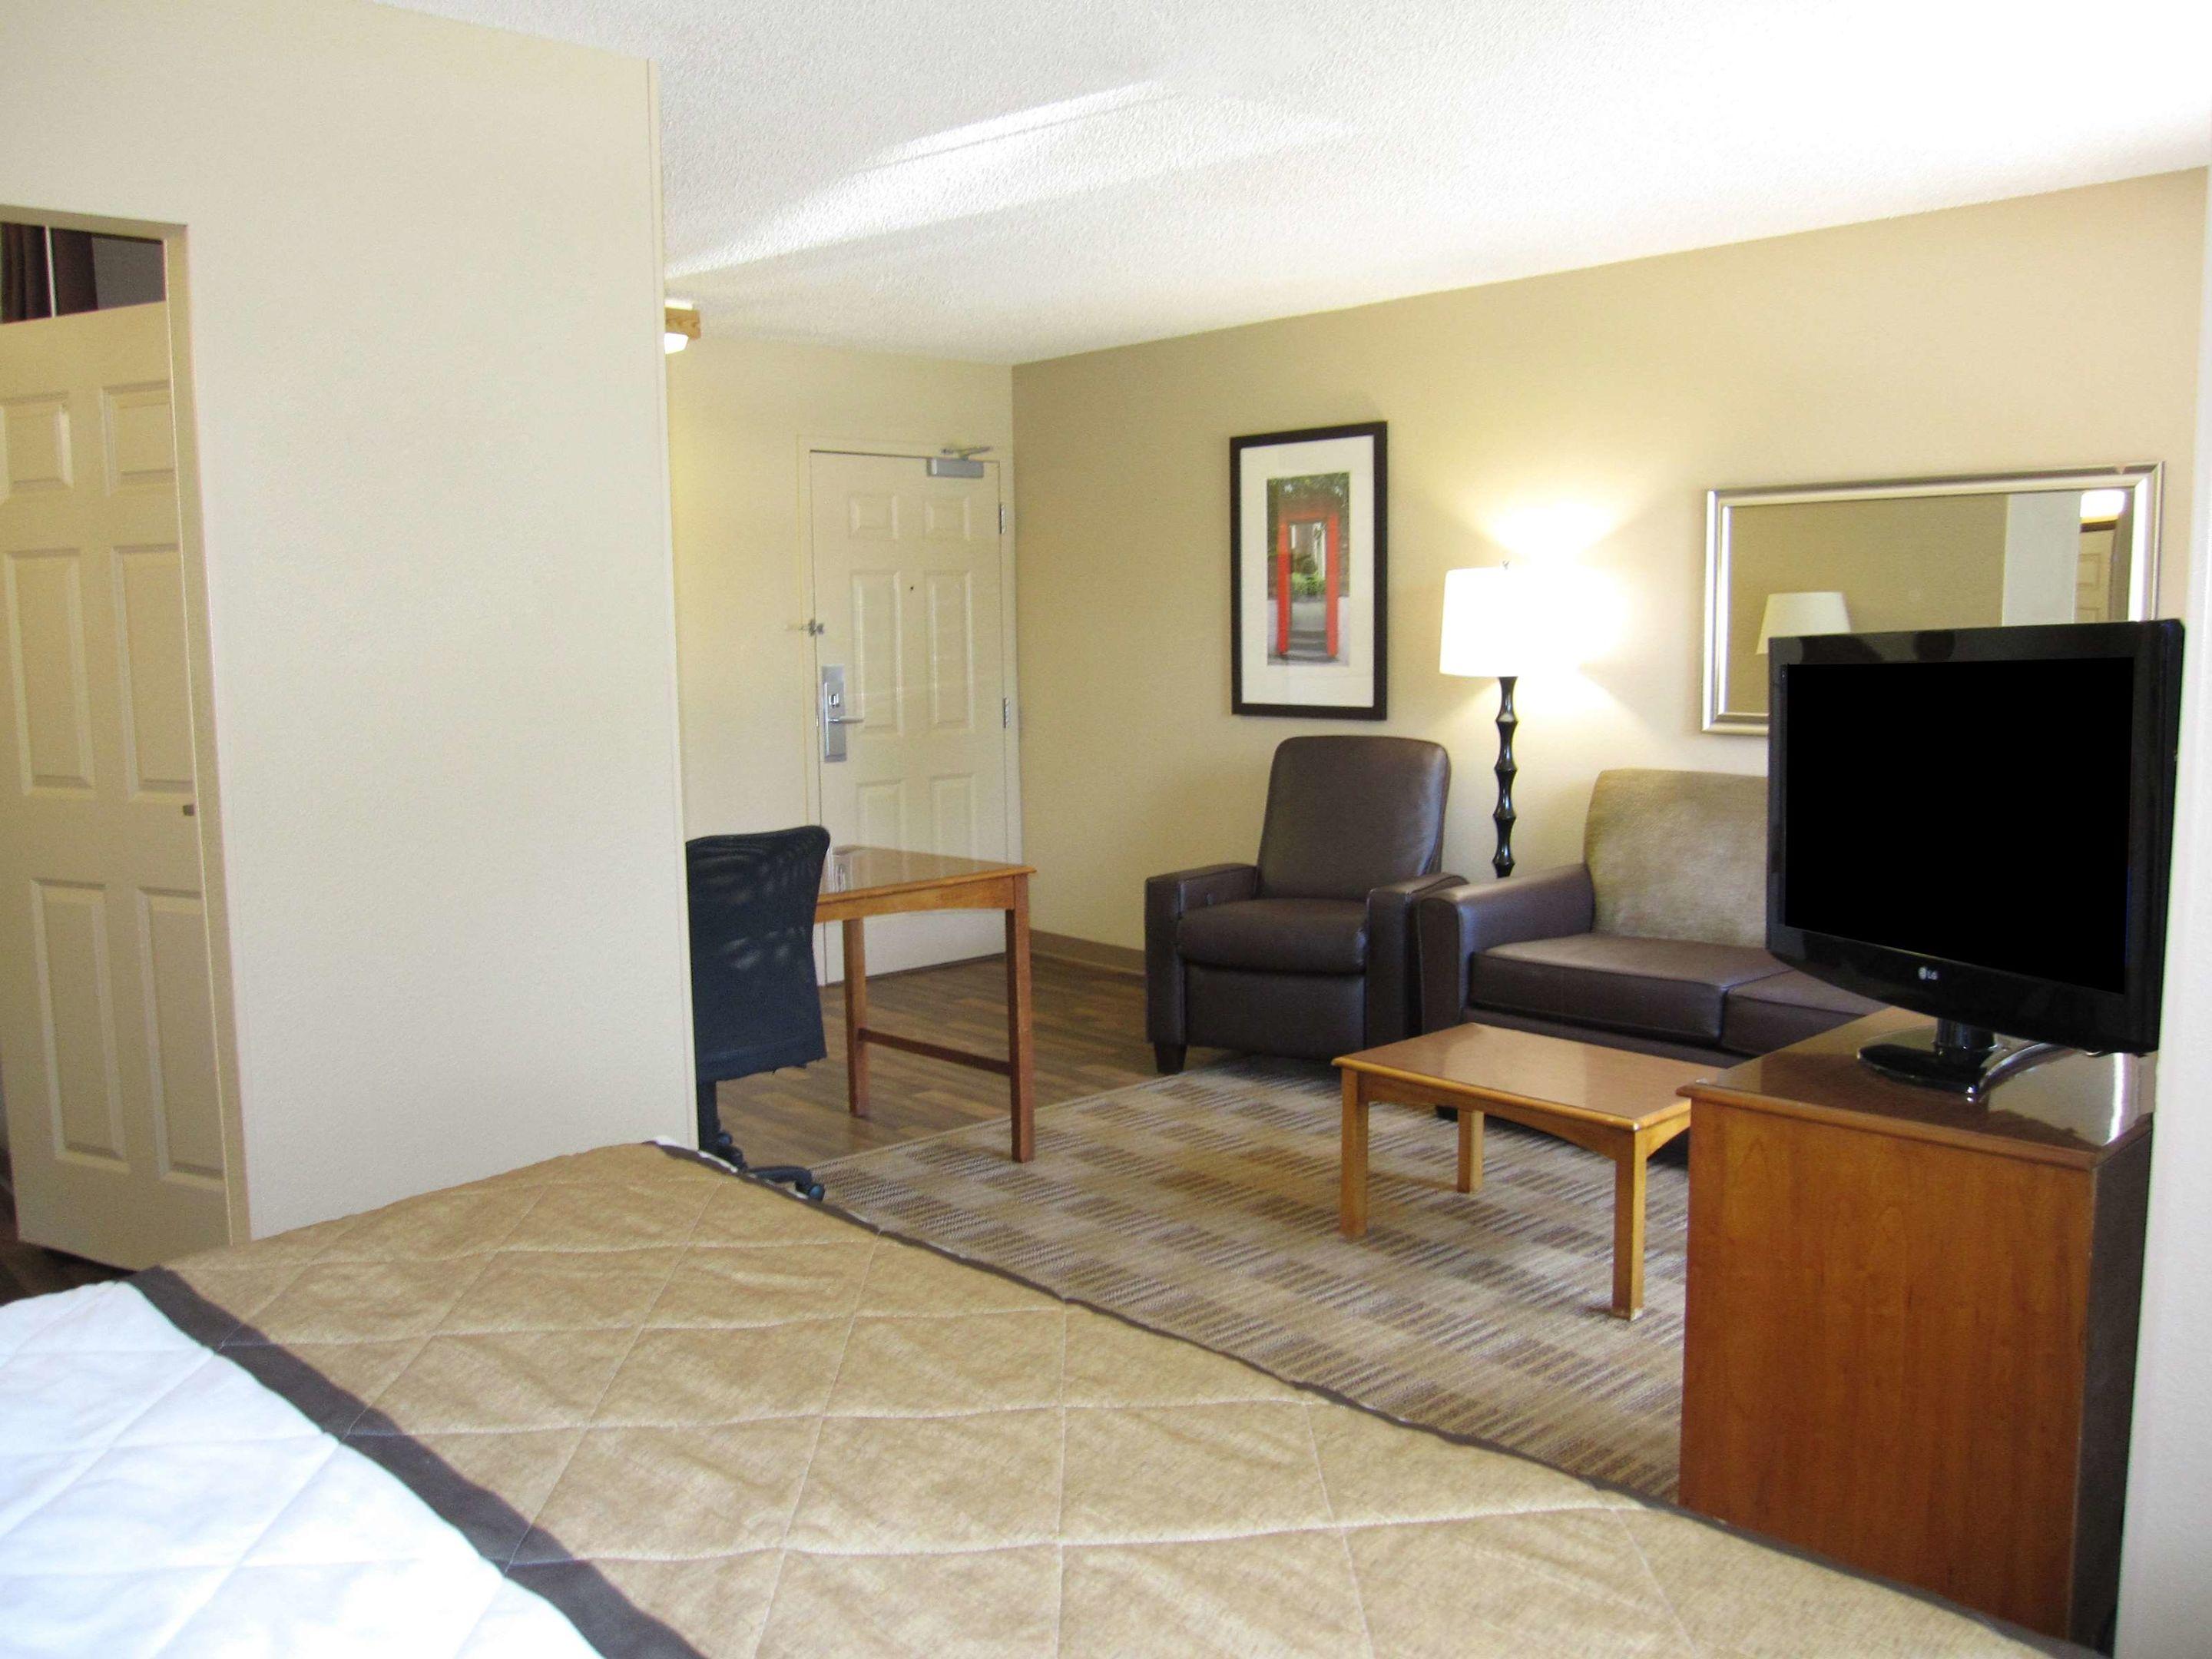 Extended Stay America - Washington D.C. - Gaithersburg - South